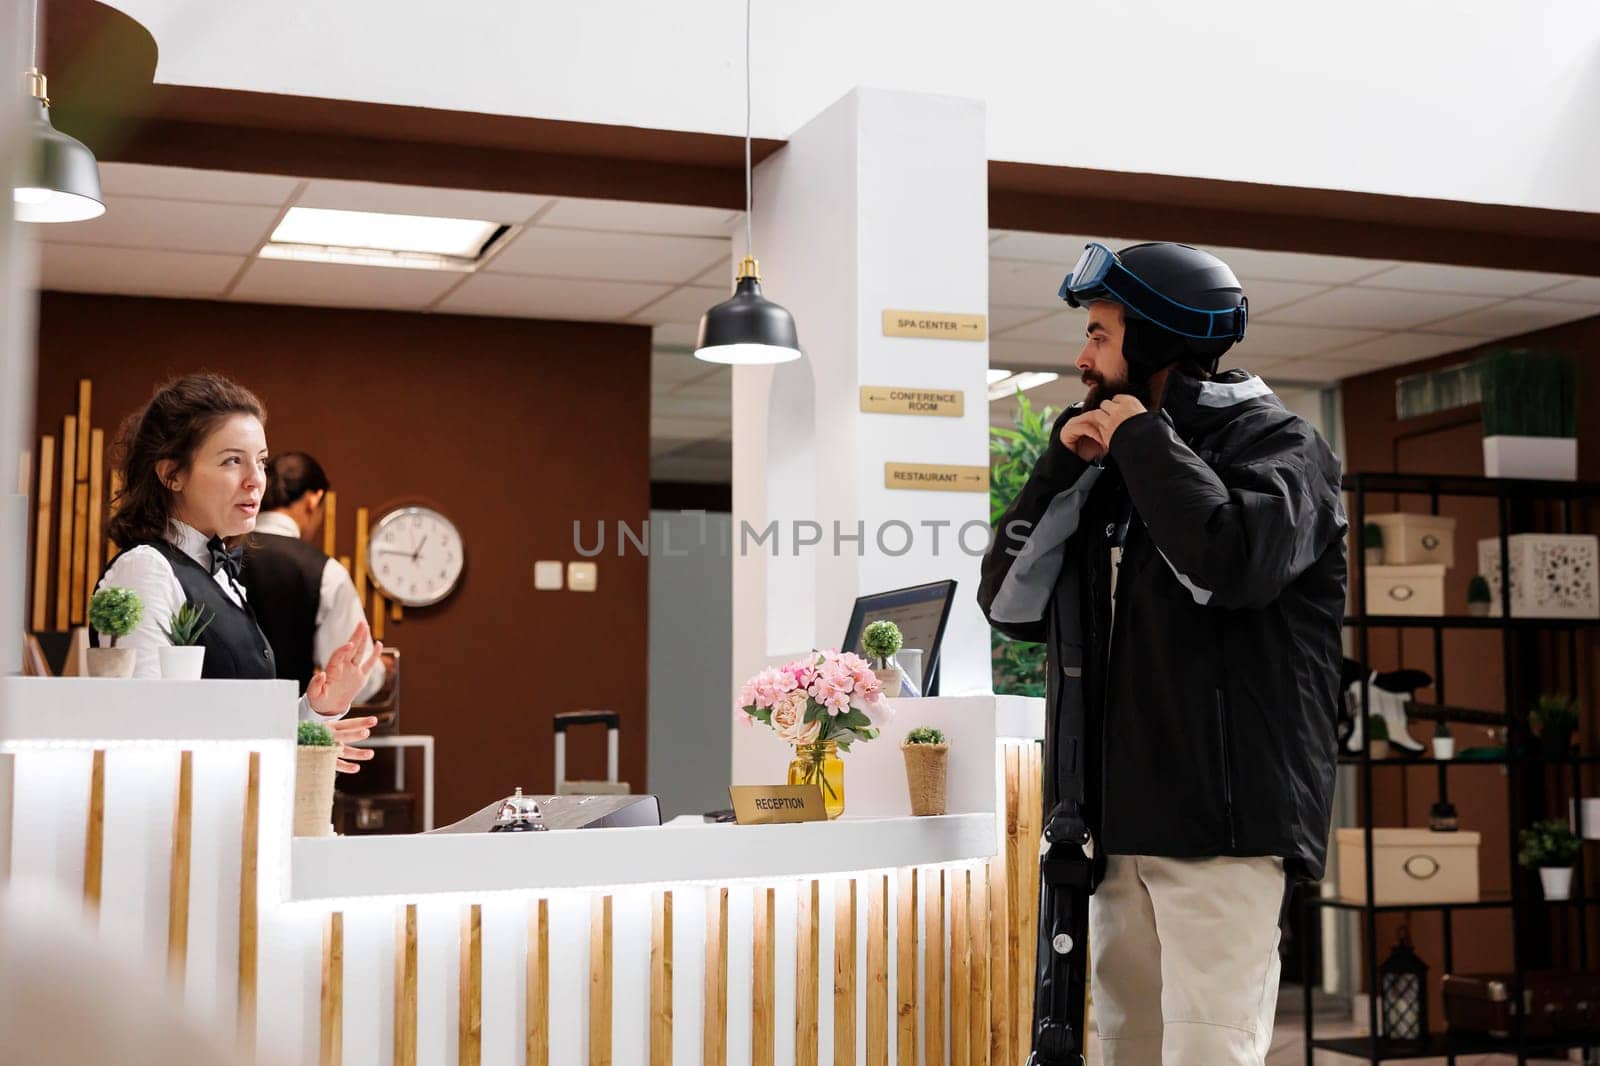 Caucasian man checking in at hotel reception for winter vacation at ski resort. Friendly female staff welcomes customer at front desk in cozy lounge area. Suitcases and ski gear in tow.